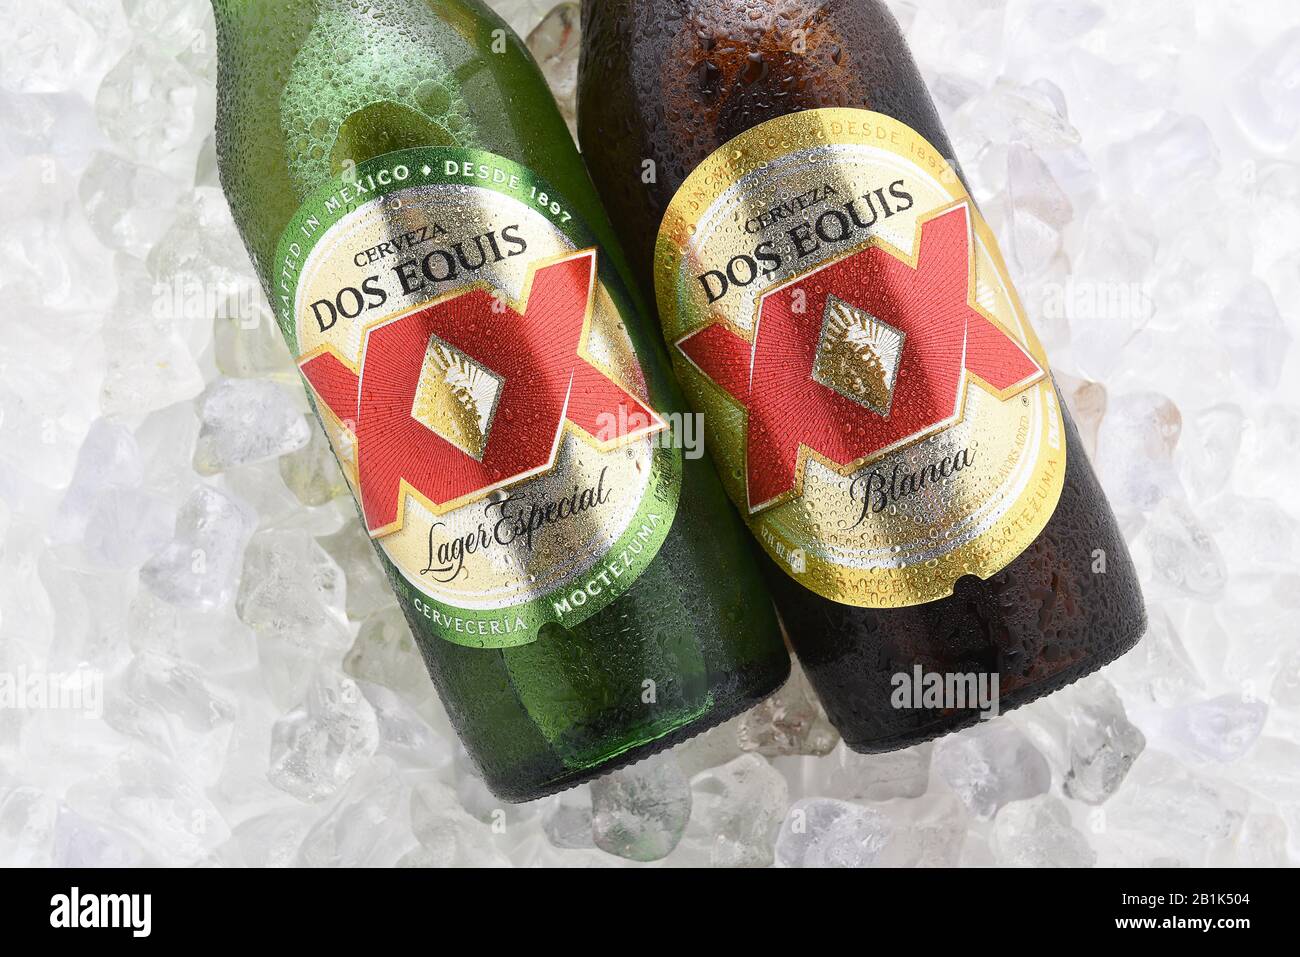 IRVINE, CA - JUNE 14, 2017: Dos Equis Blanca and Especial on ice. Two bottles the beer from Cuauhtemoc-Moctezuma Brewery in Monterrey, Mexico a subsid Stock Photo